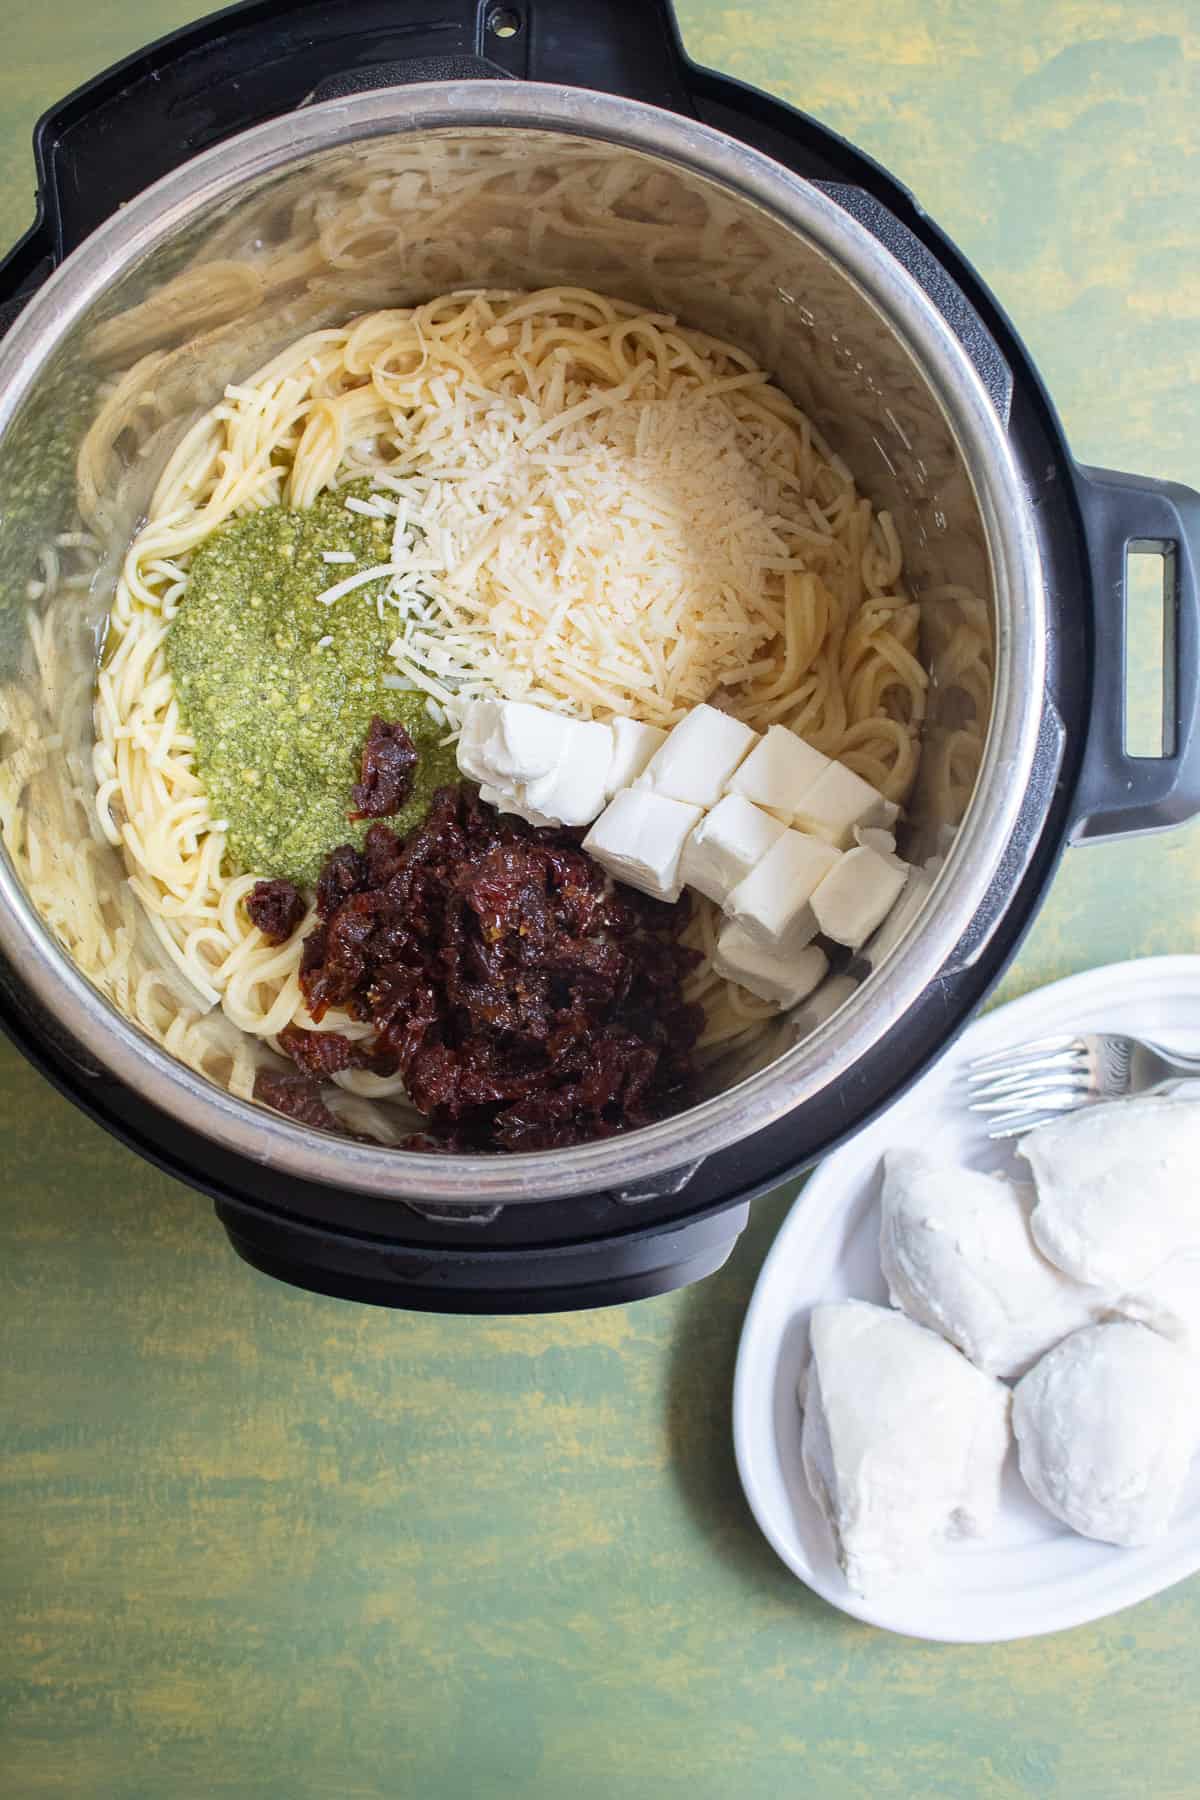 The cooked spaghetti is combined with sundried tomatoes, pesto, cream cheese, and Parmesan cheese in the insert of the Instant Pot.